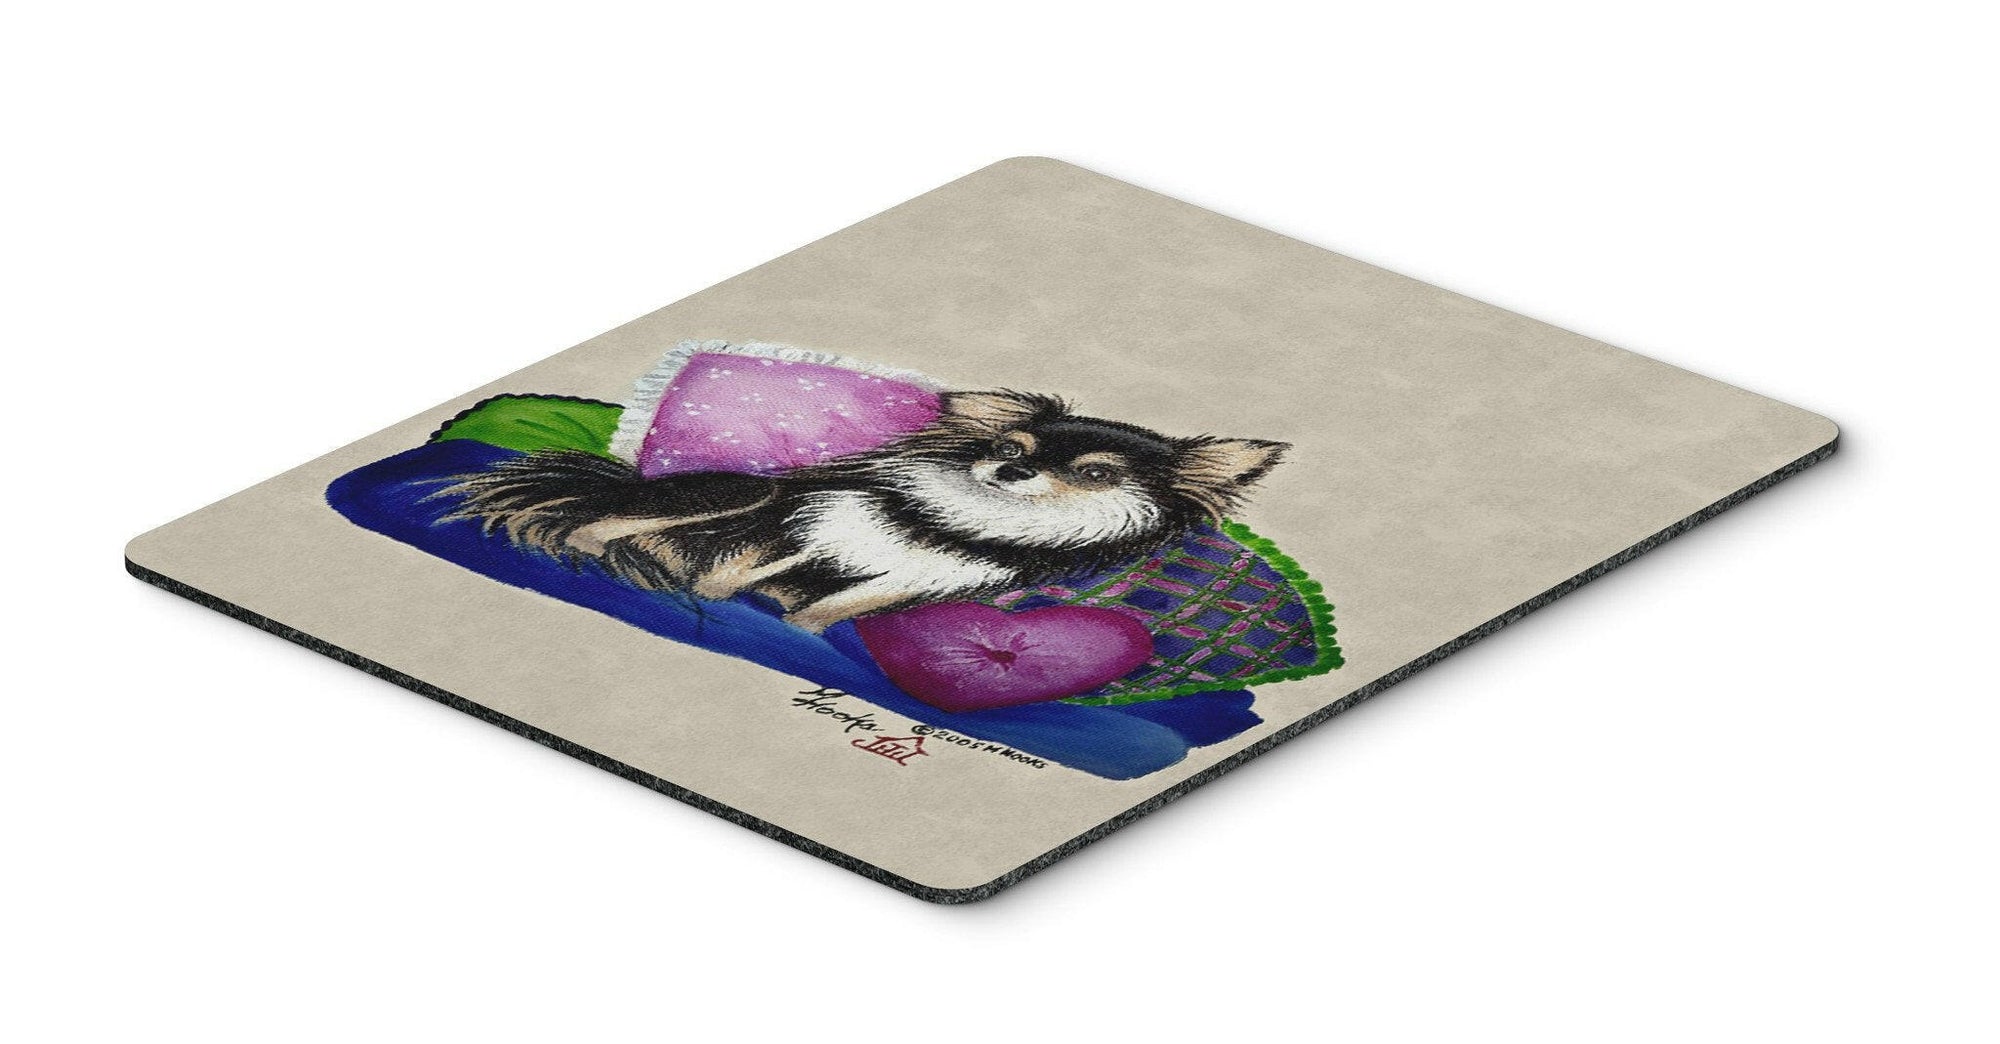 Chihuahua on their couch Mouse Pad, Hot Pad or Trivet MH1012MP by Caroline's Treasures